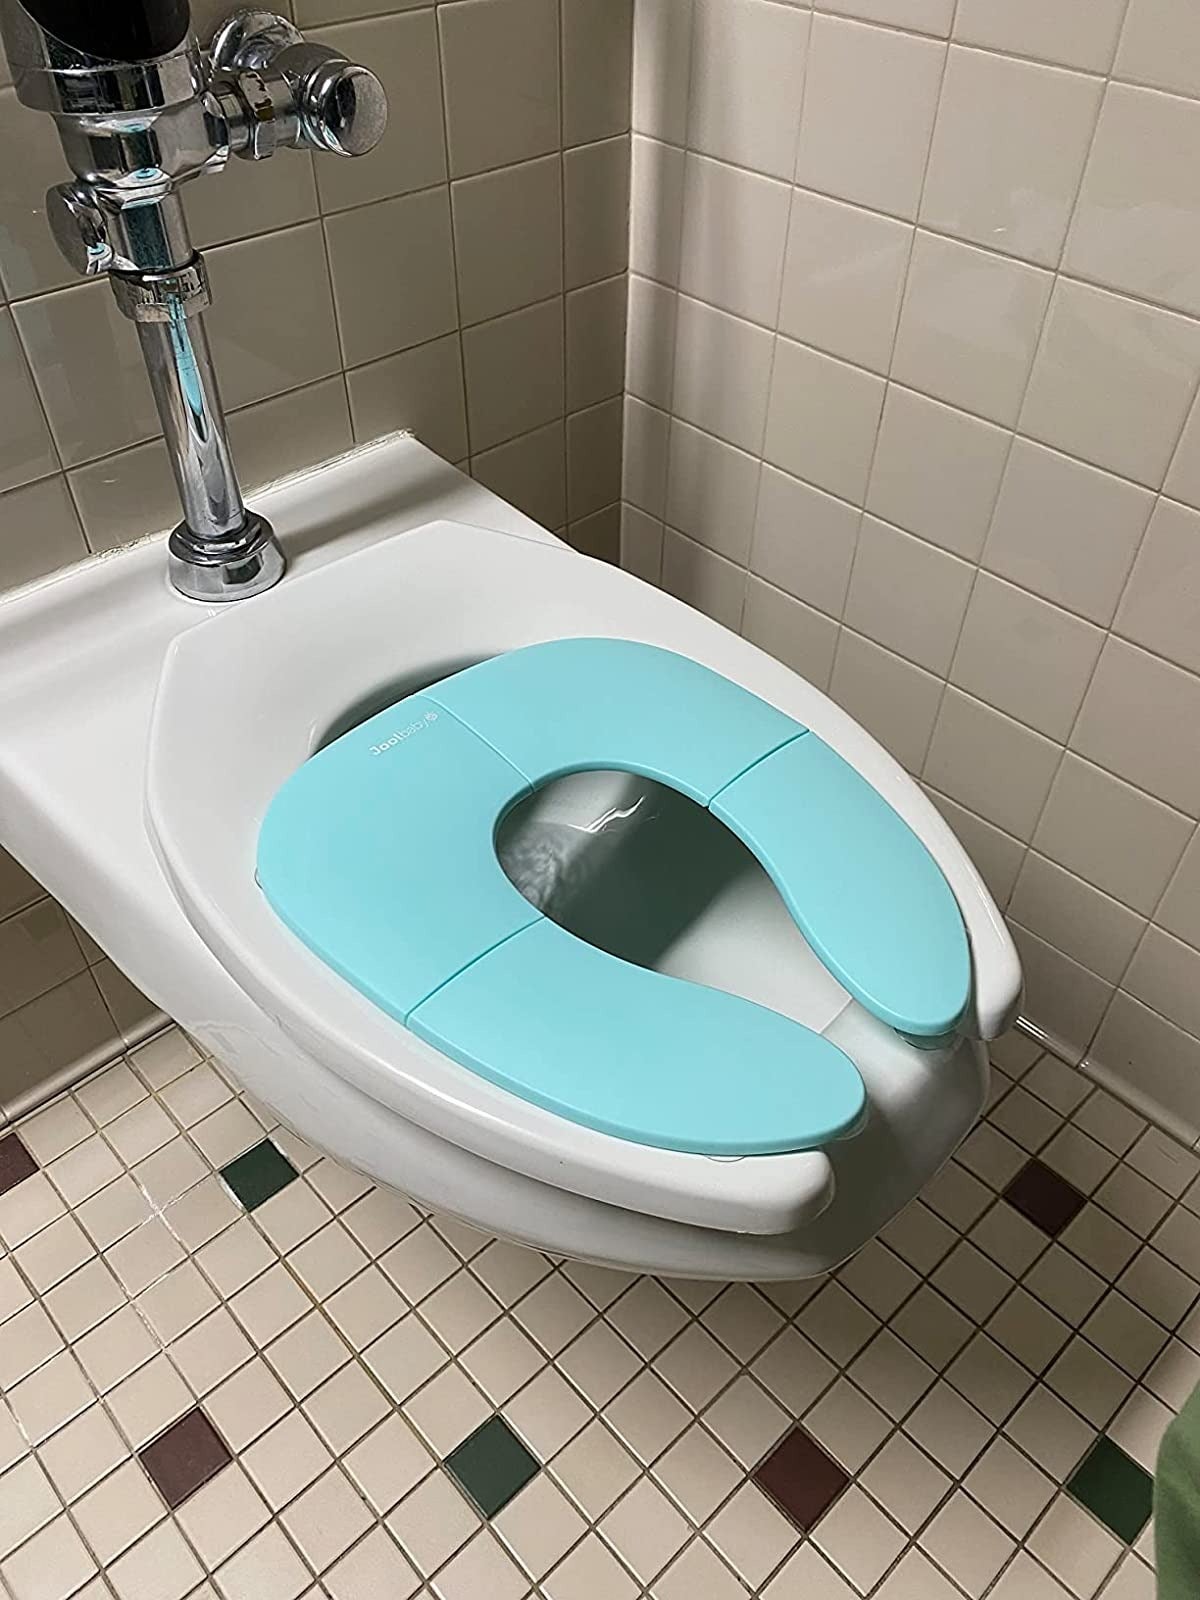 reviewer image of the blue portable potty seat on a public toilet